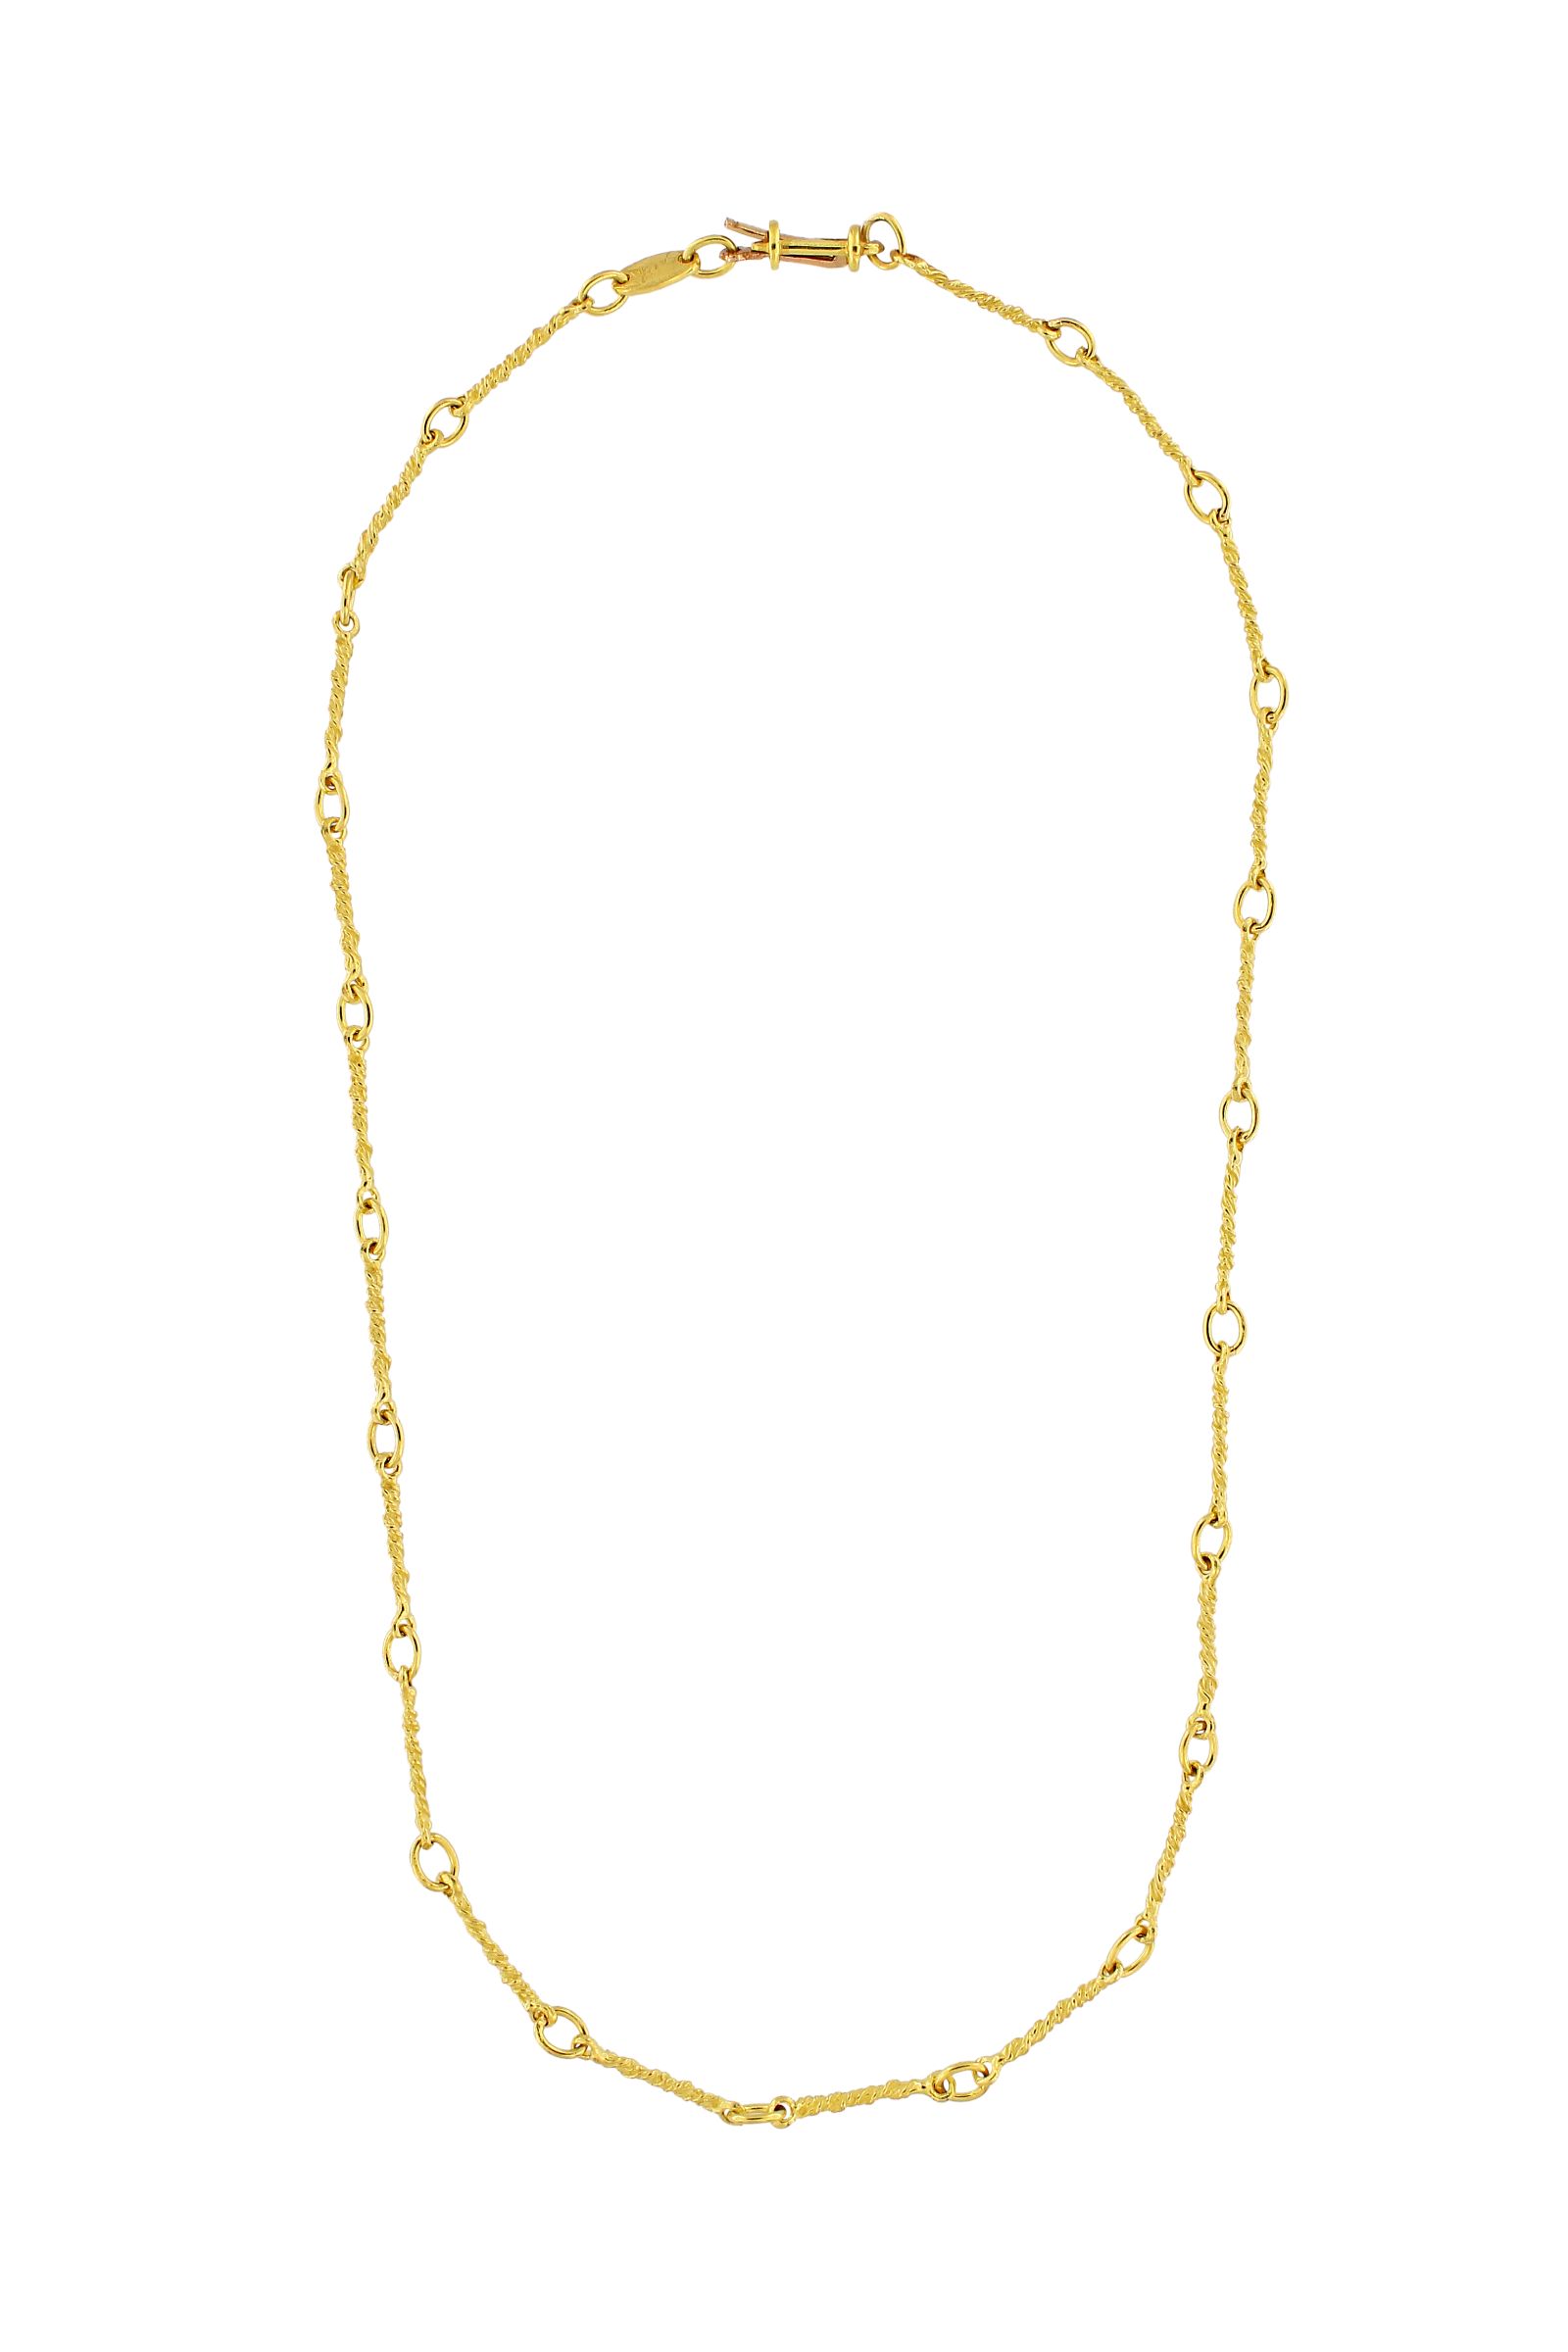 SA04B-18-Kt-Yellow-Gold-Chain-Necklace-1